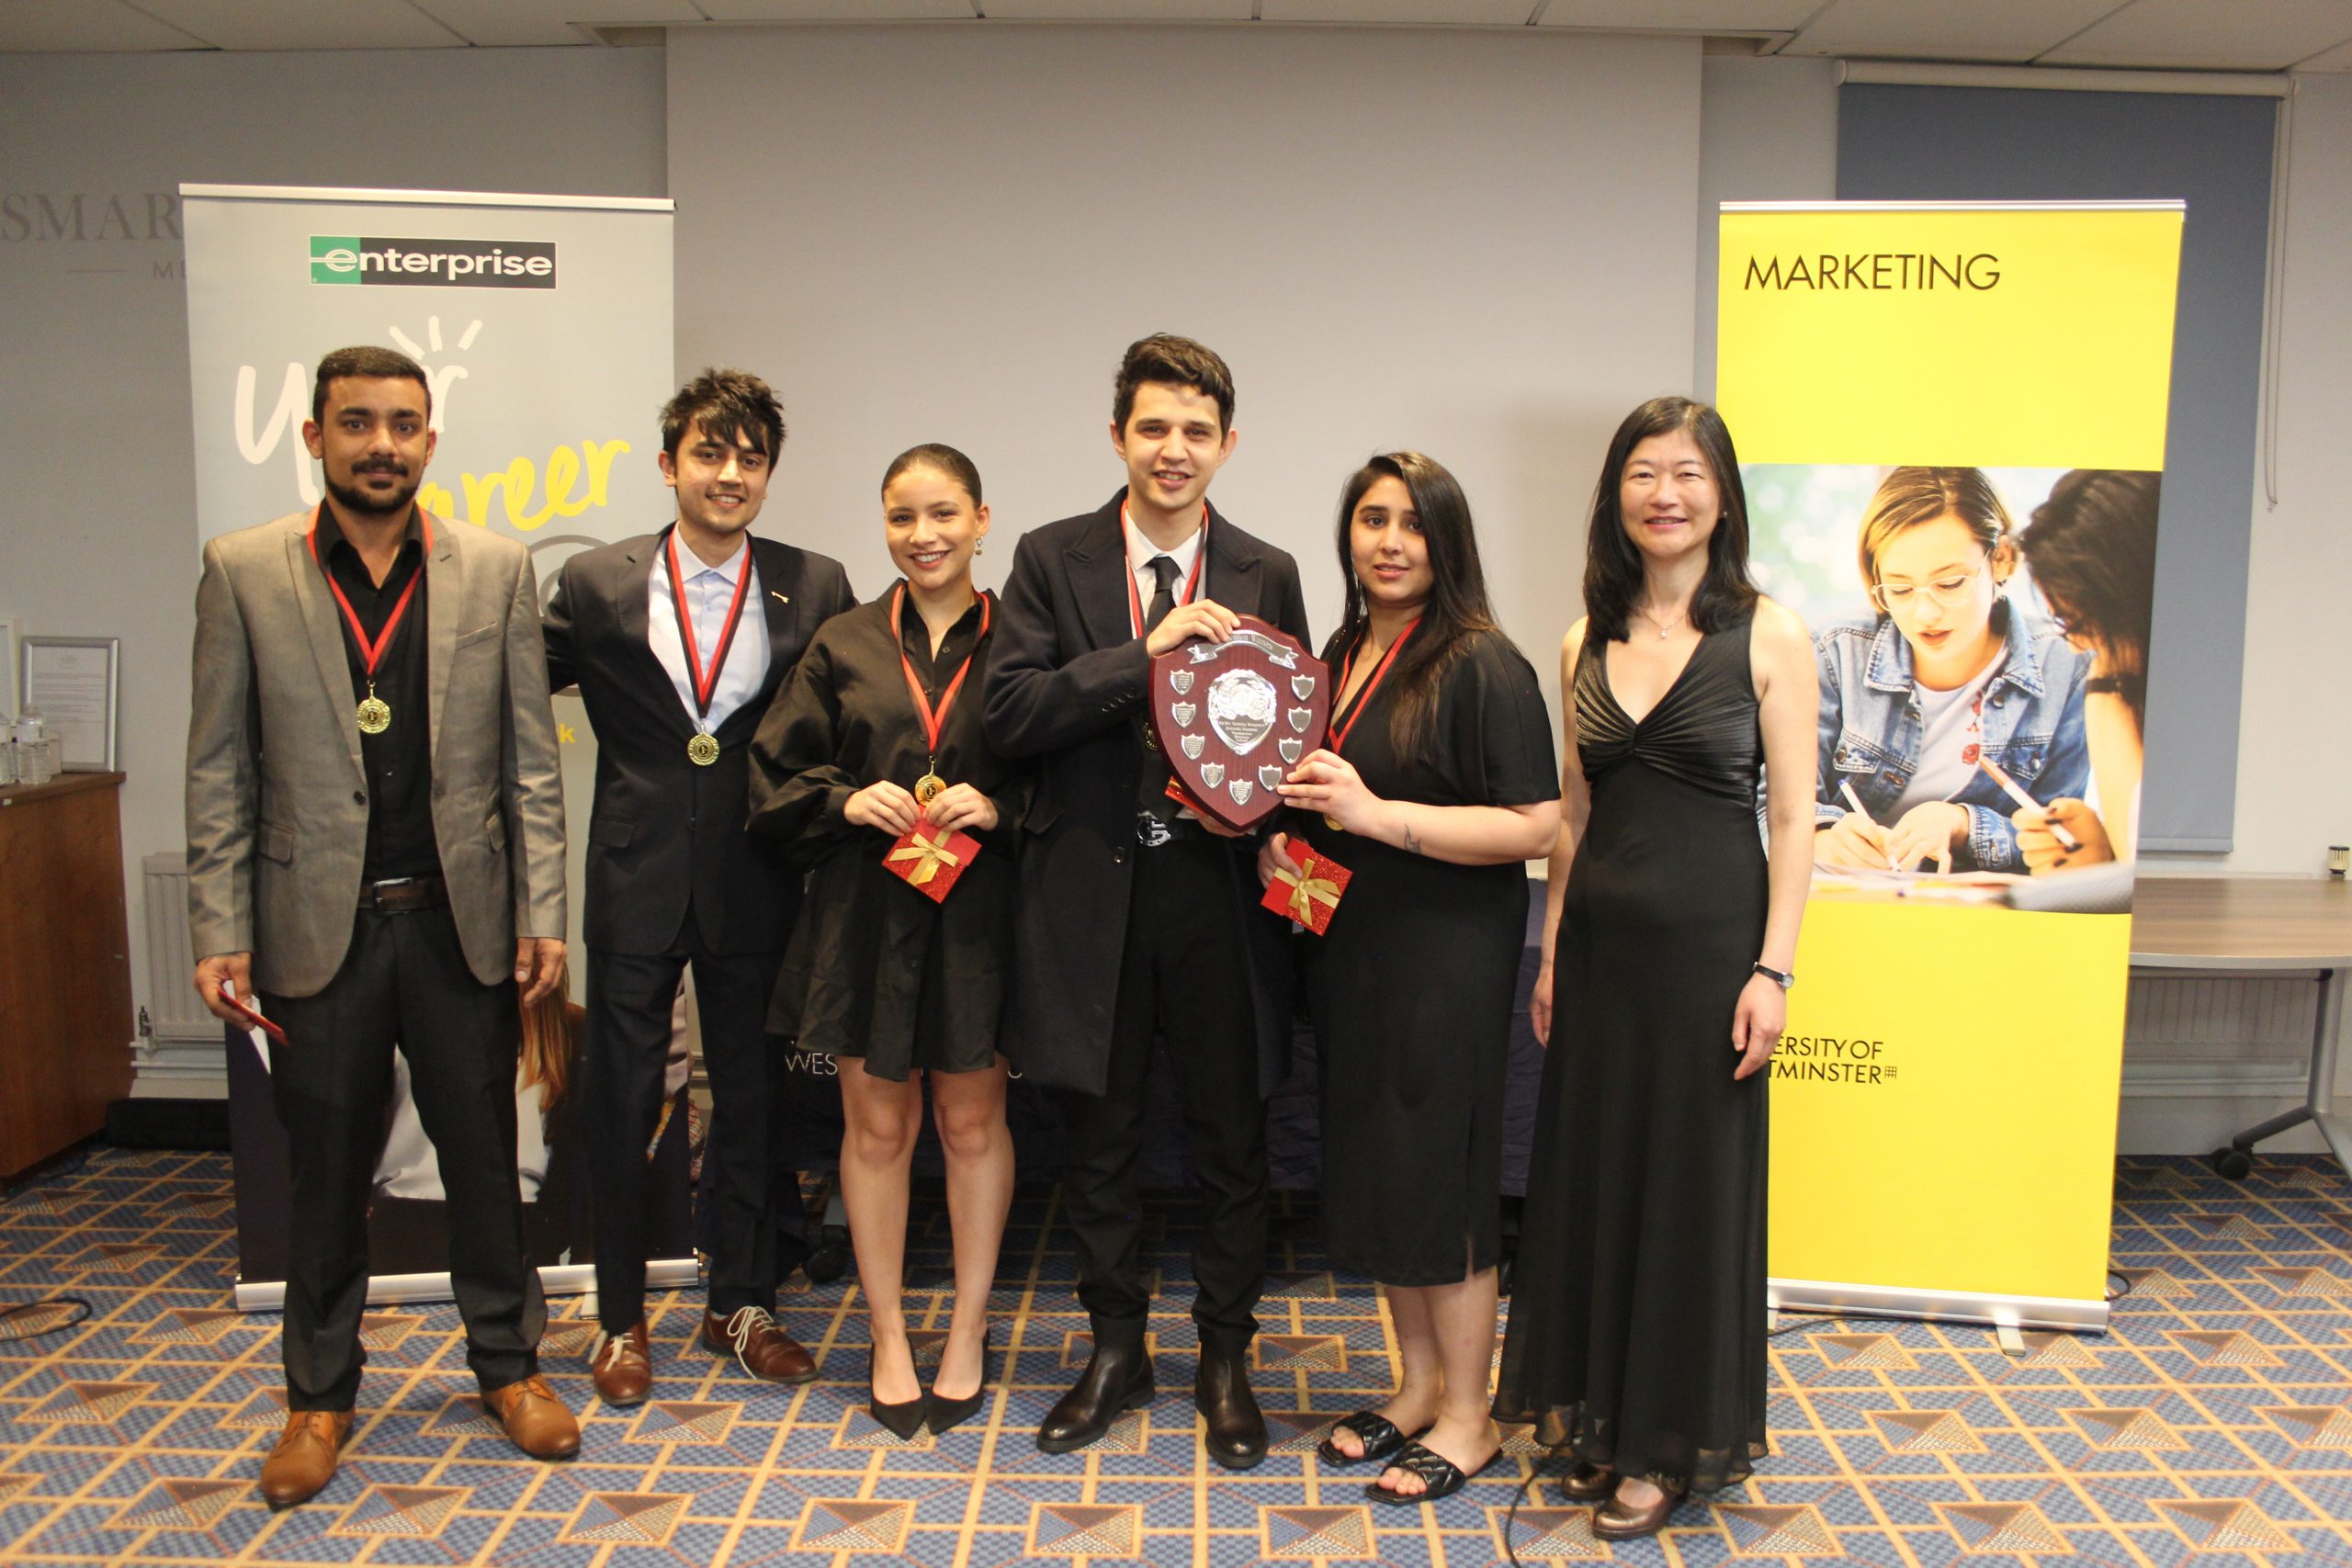 Prize-Giving Ceremony with winning team and Donna Mai flanked by Marketing and Enterprise banners